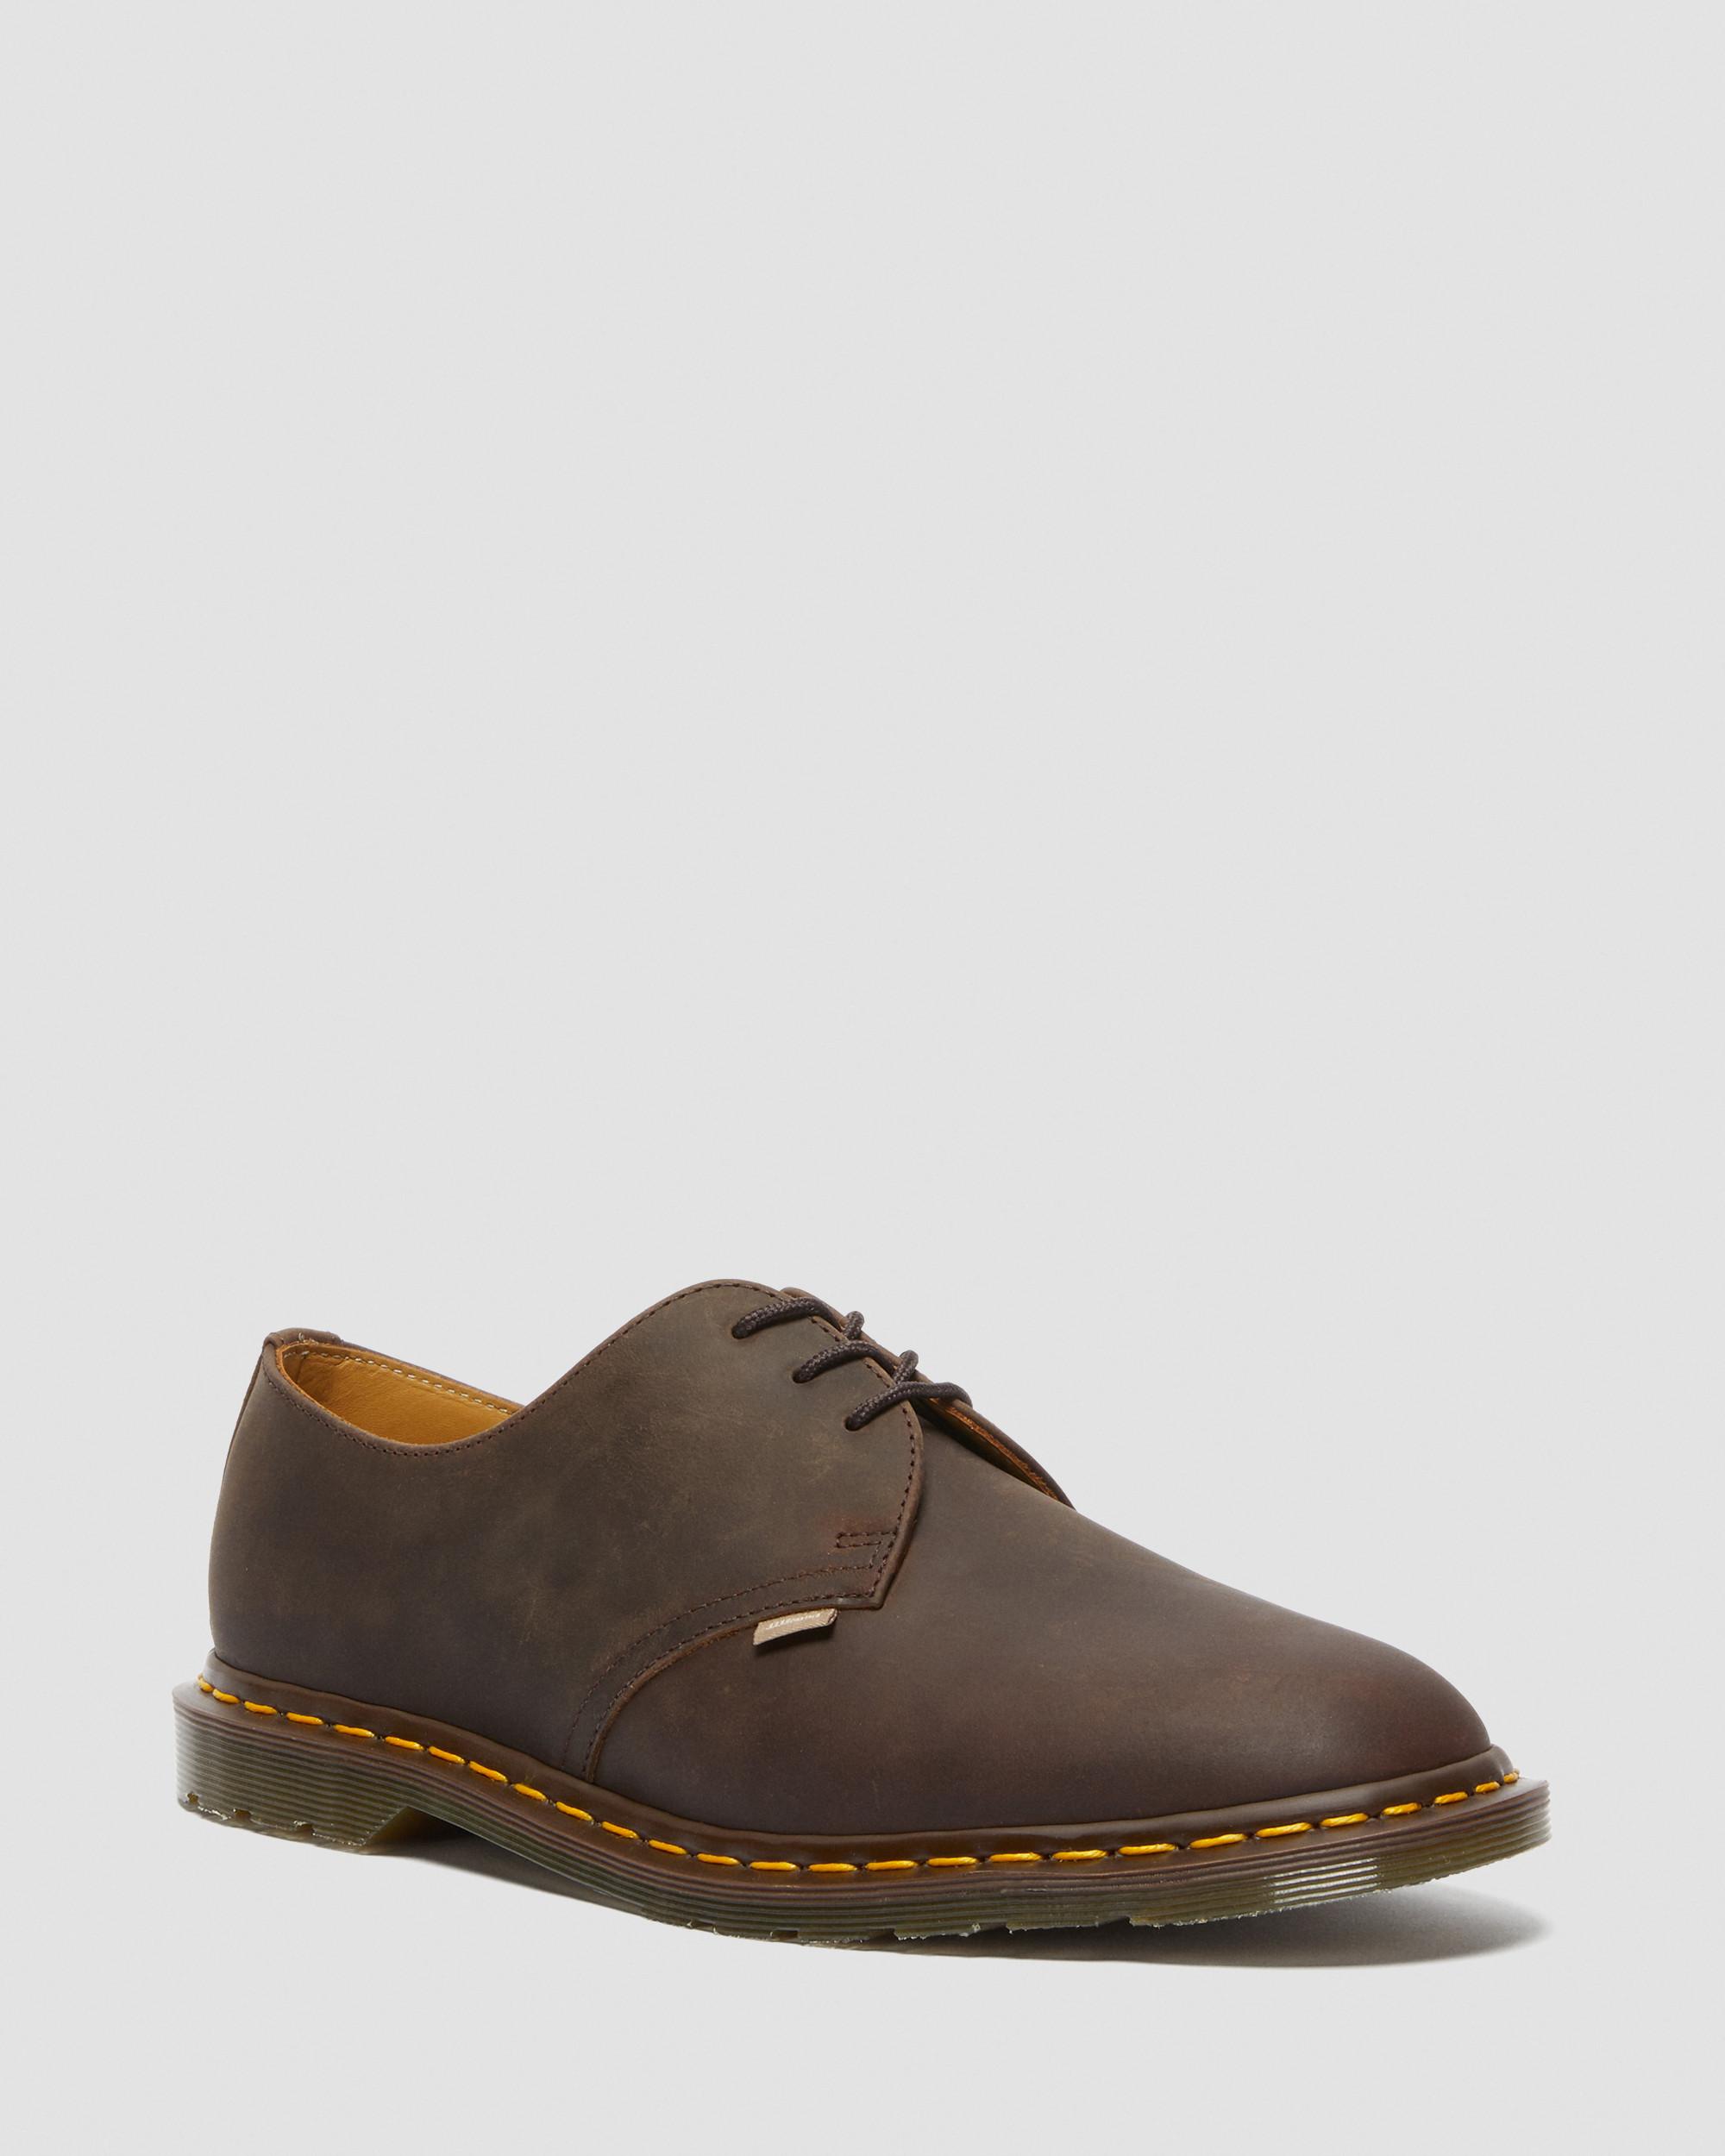 Dr. Martens' Archie Ii Jjjjound Crazy Horse Leather Lace Up Shoes In Brown